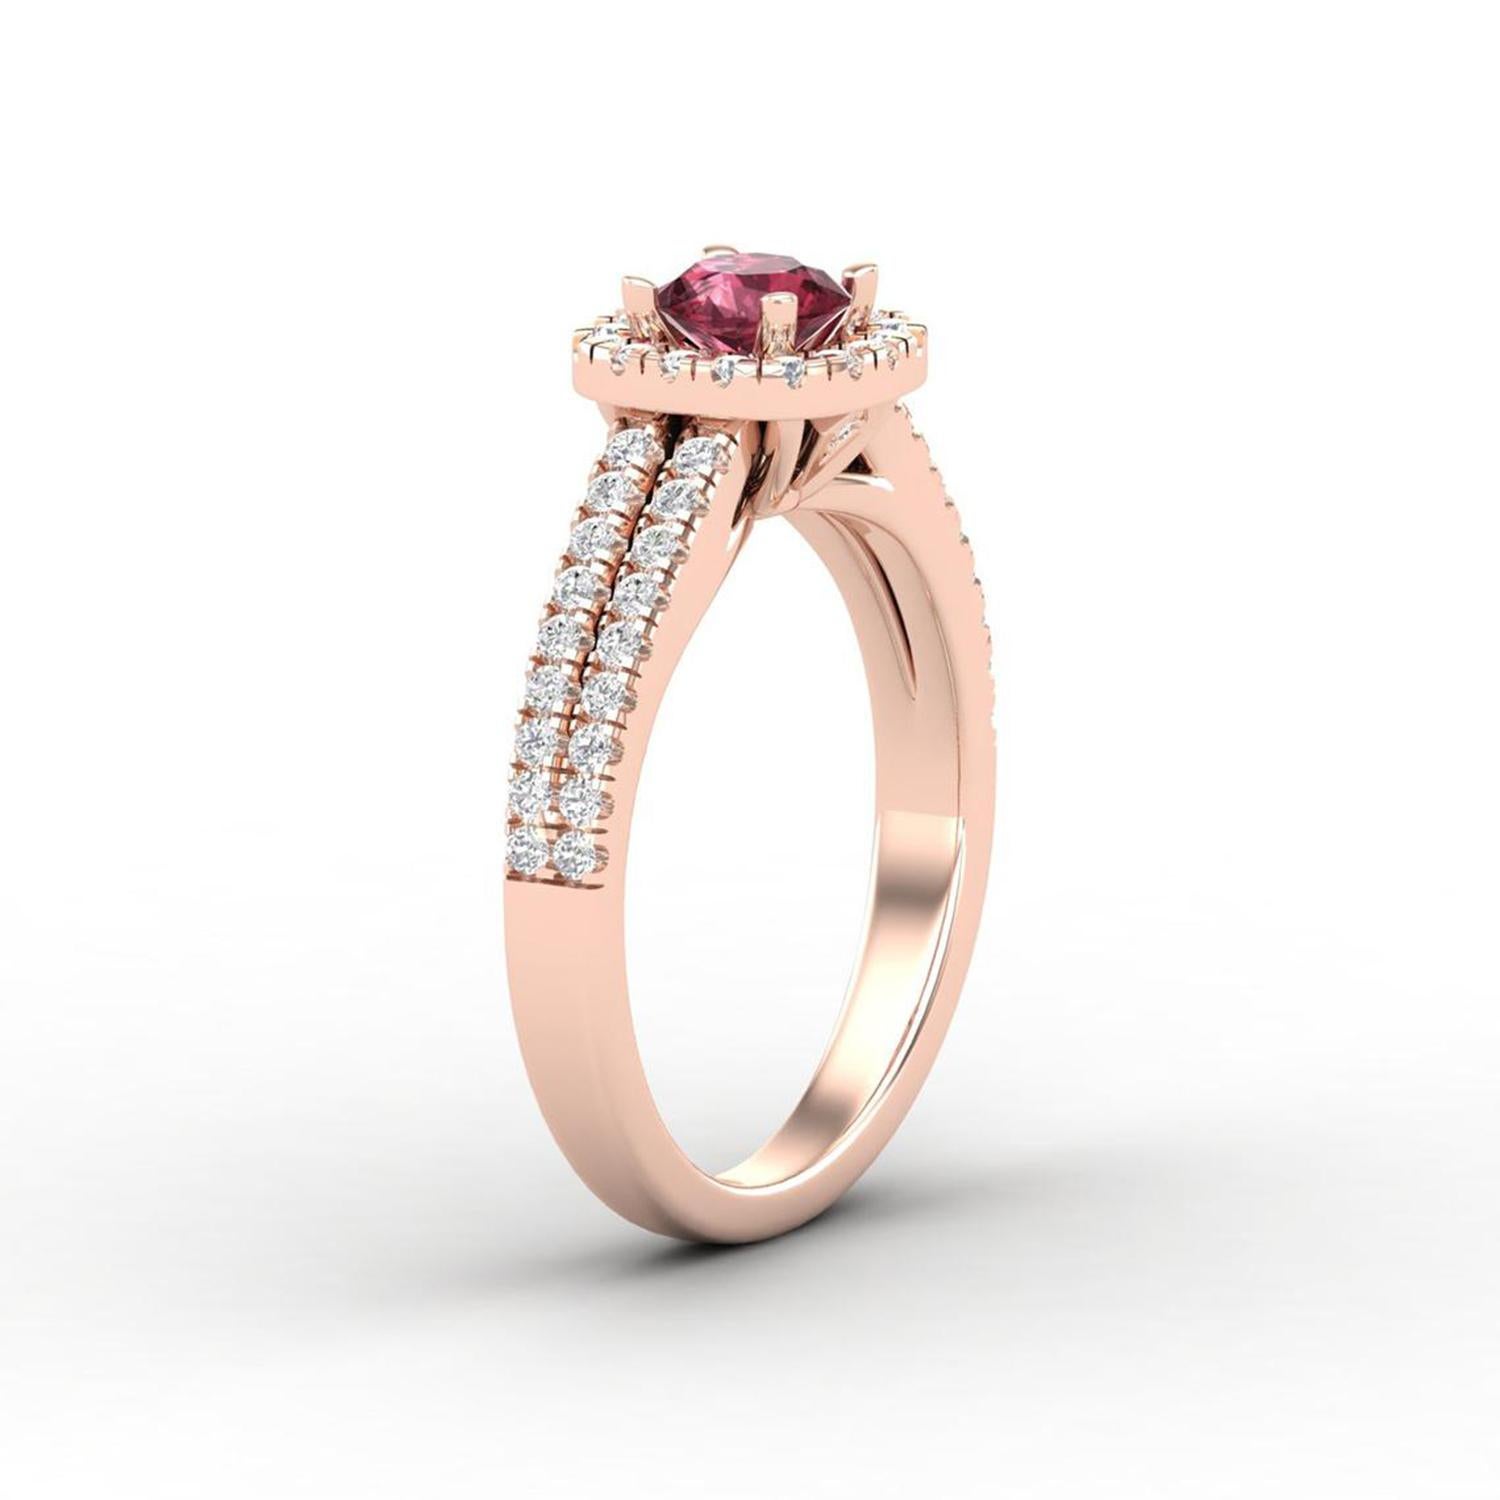 14 K Gold 5 MM Round Garnet Ring / 1.2 MM Round Diamond Ring / Solitaire Ring In New Condition For Sale In Jaipur, RJ